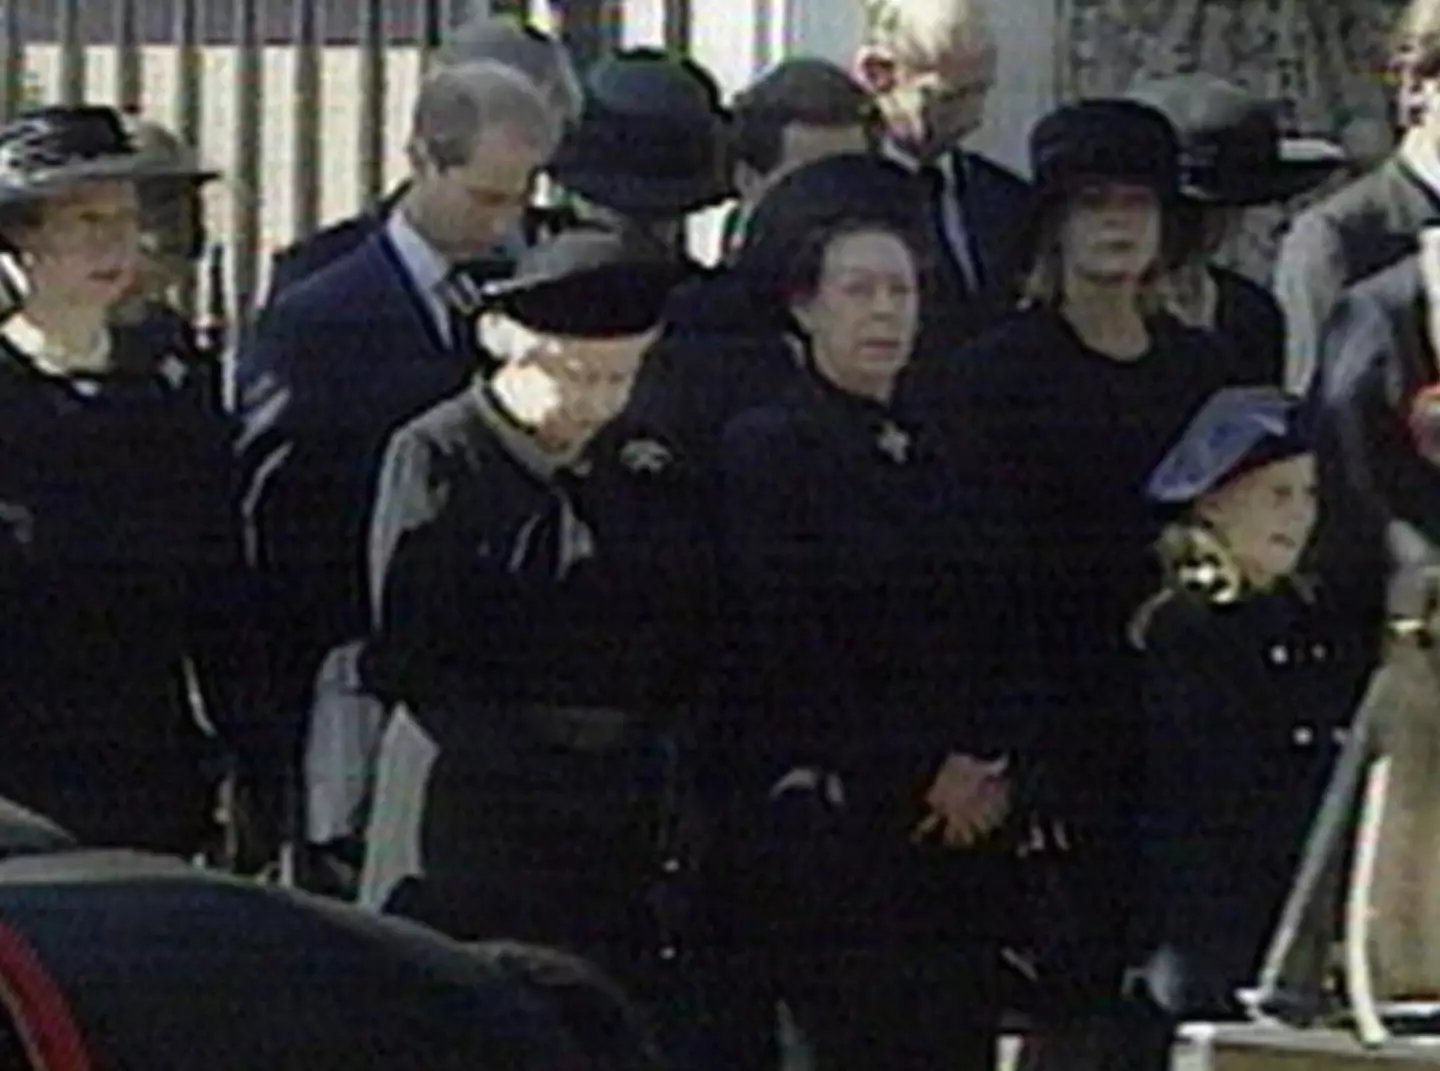 The Queen bowed to Princess Diana's coffin.